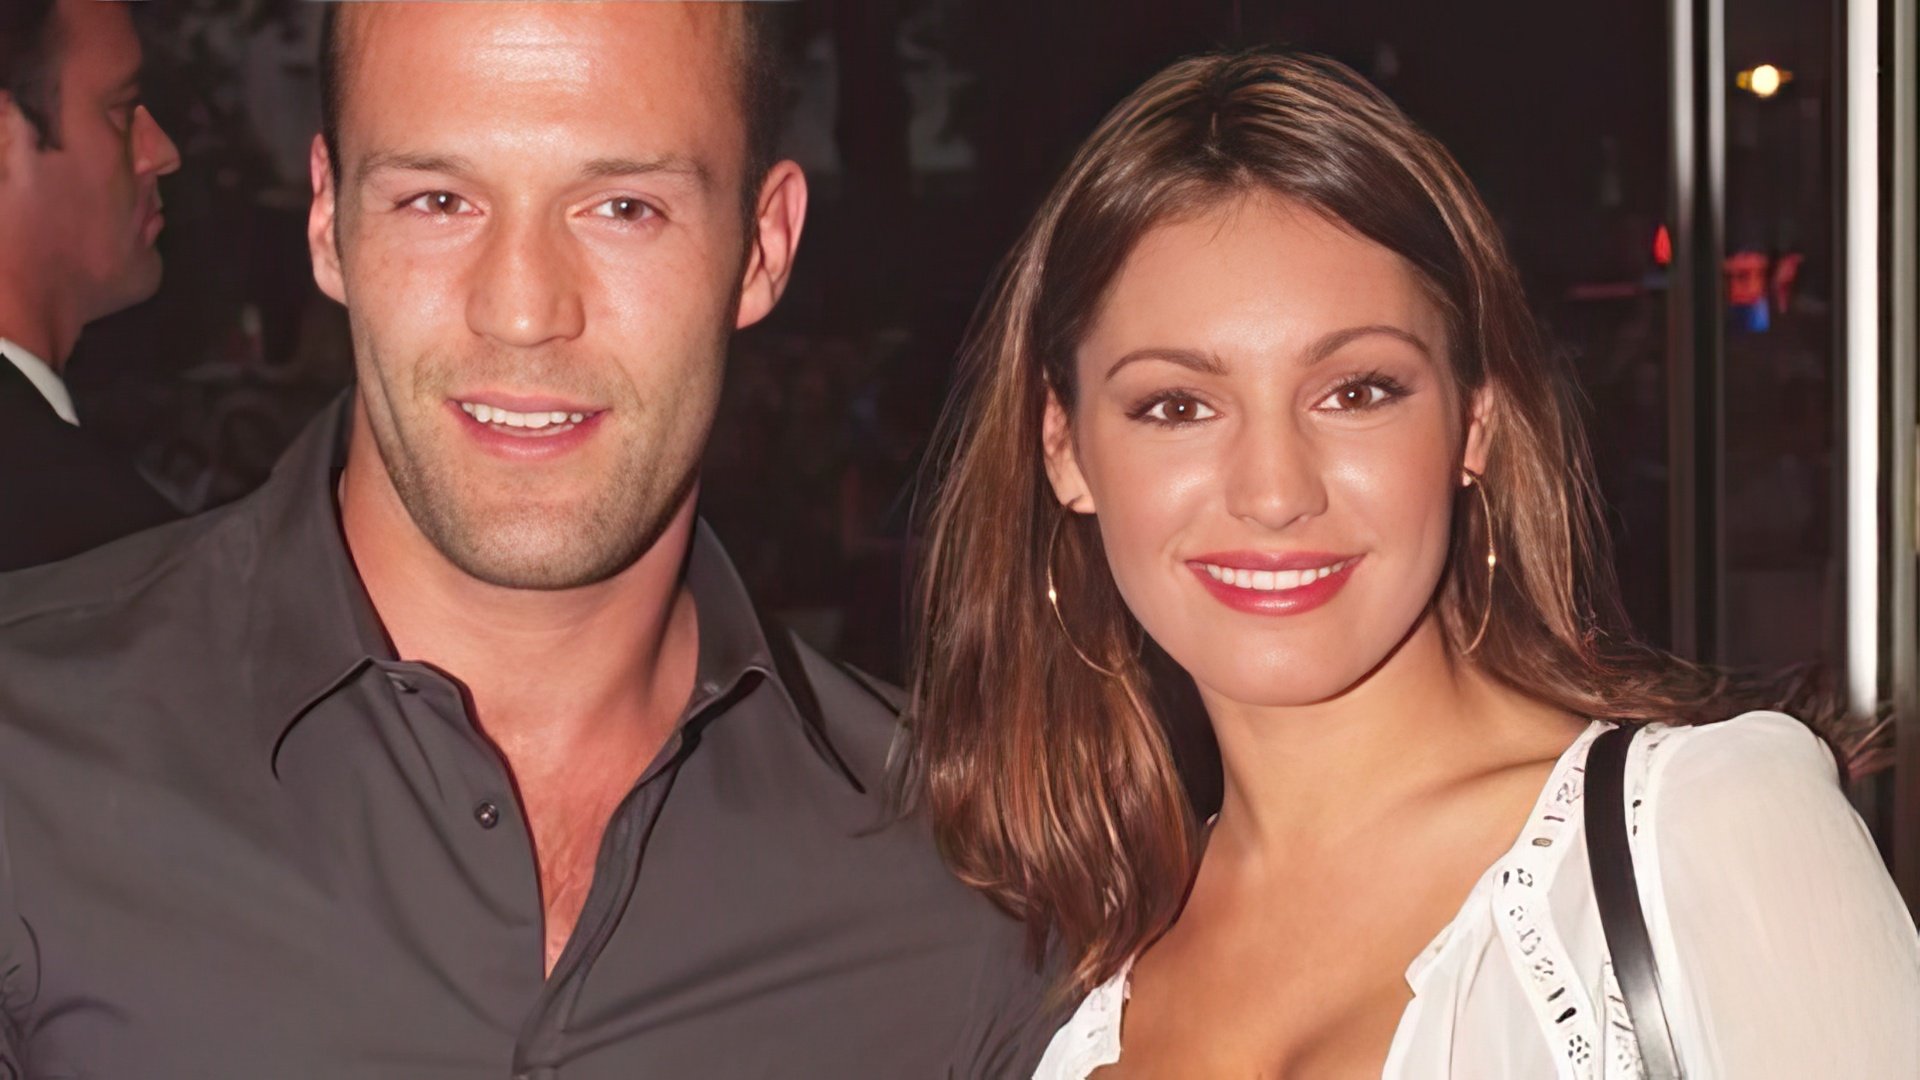 In his youth, Jason Statham as dating Kelly Brook